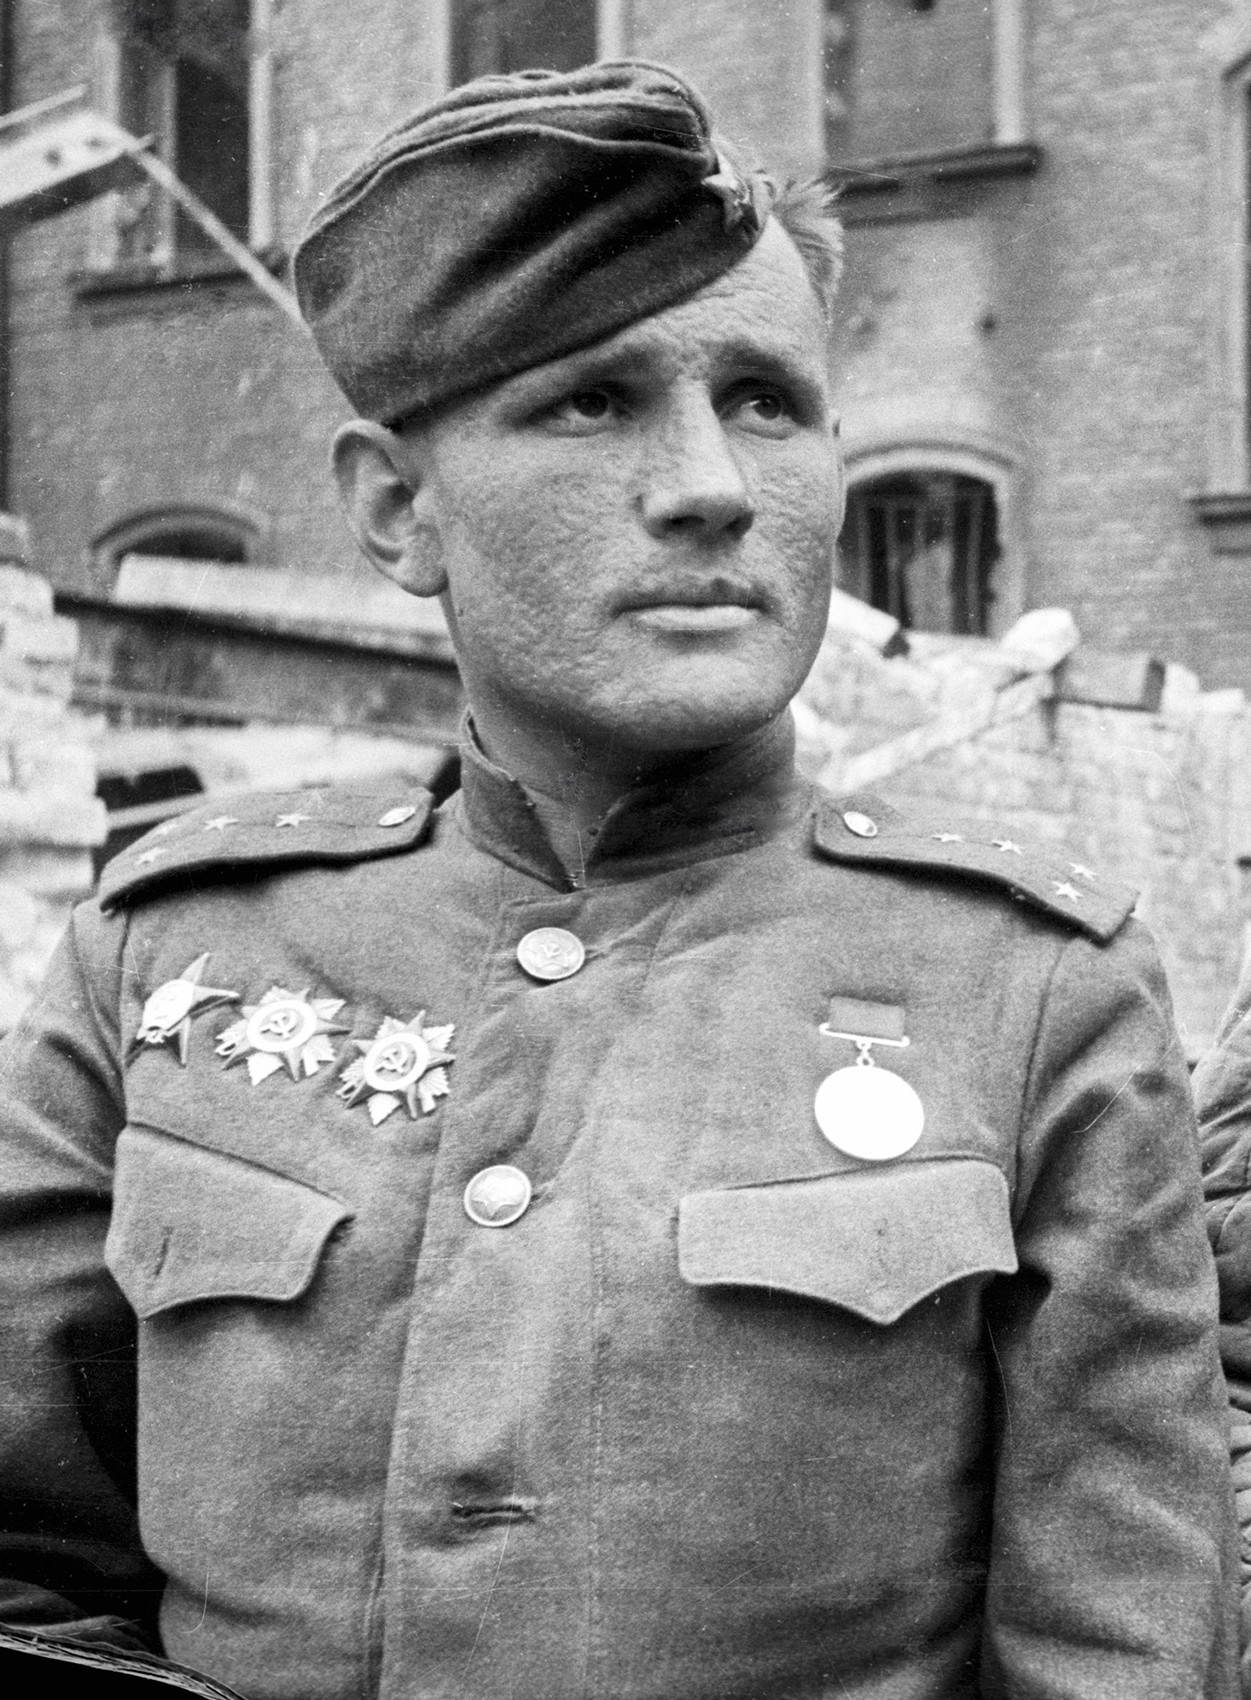 Stepan Neustroev (1922-1998), Soviet officer, commander of the 1st Battalion in the 756th Regiment of the 150th Rifle Division. His unit stormed the Reichstag.